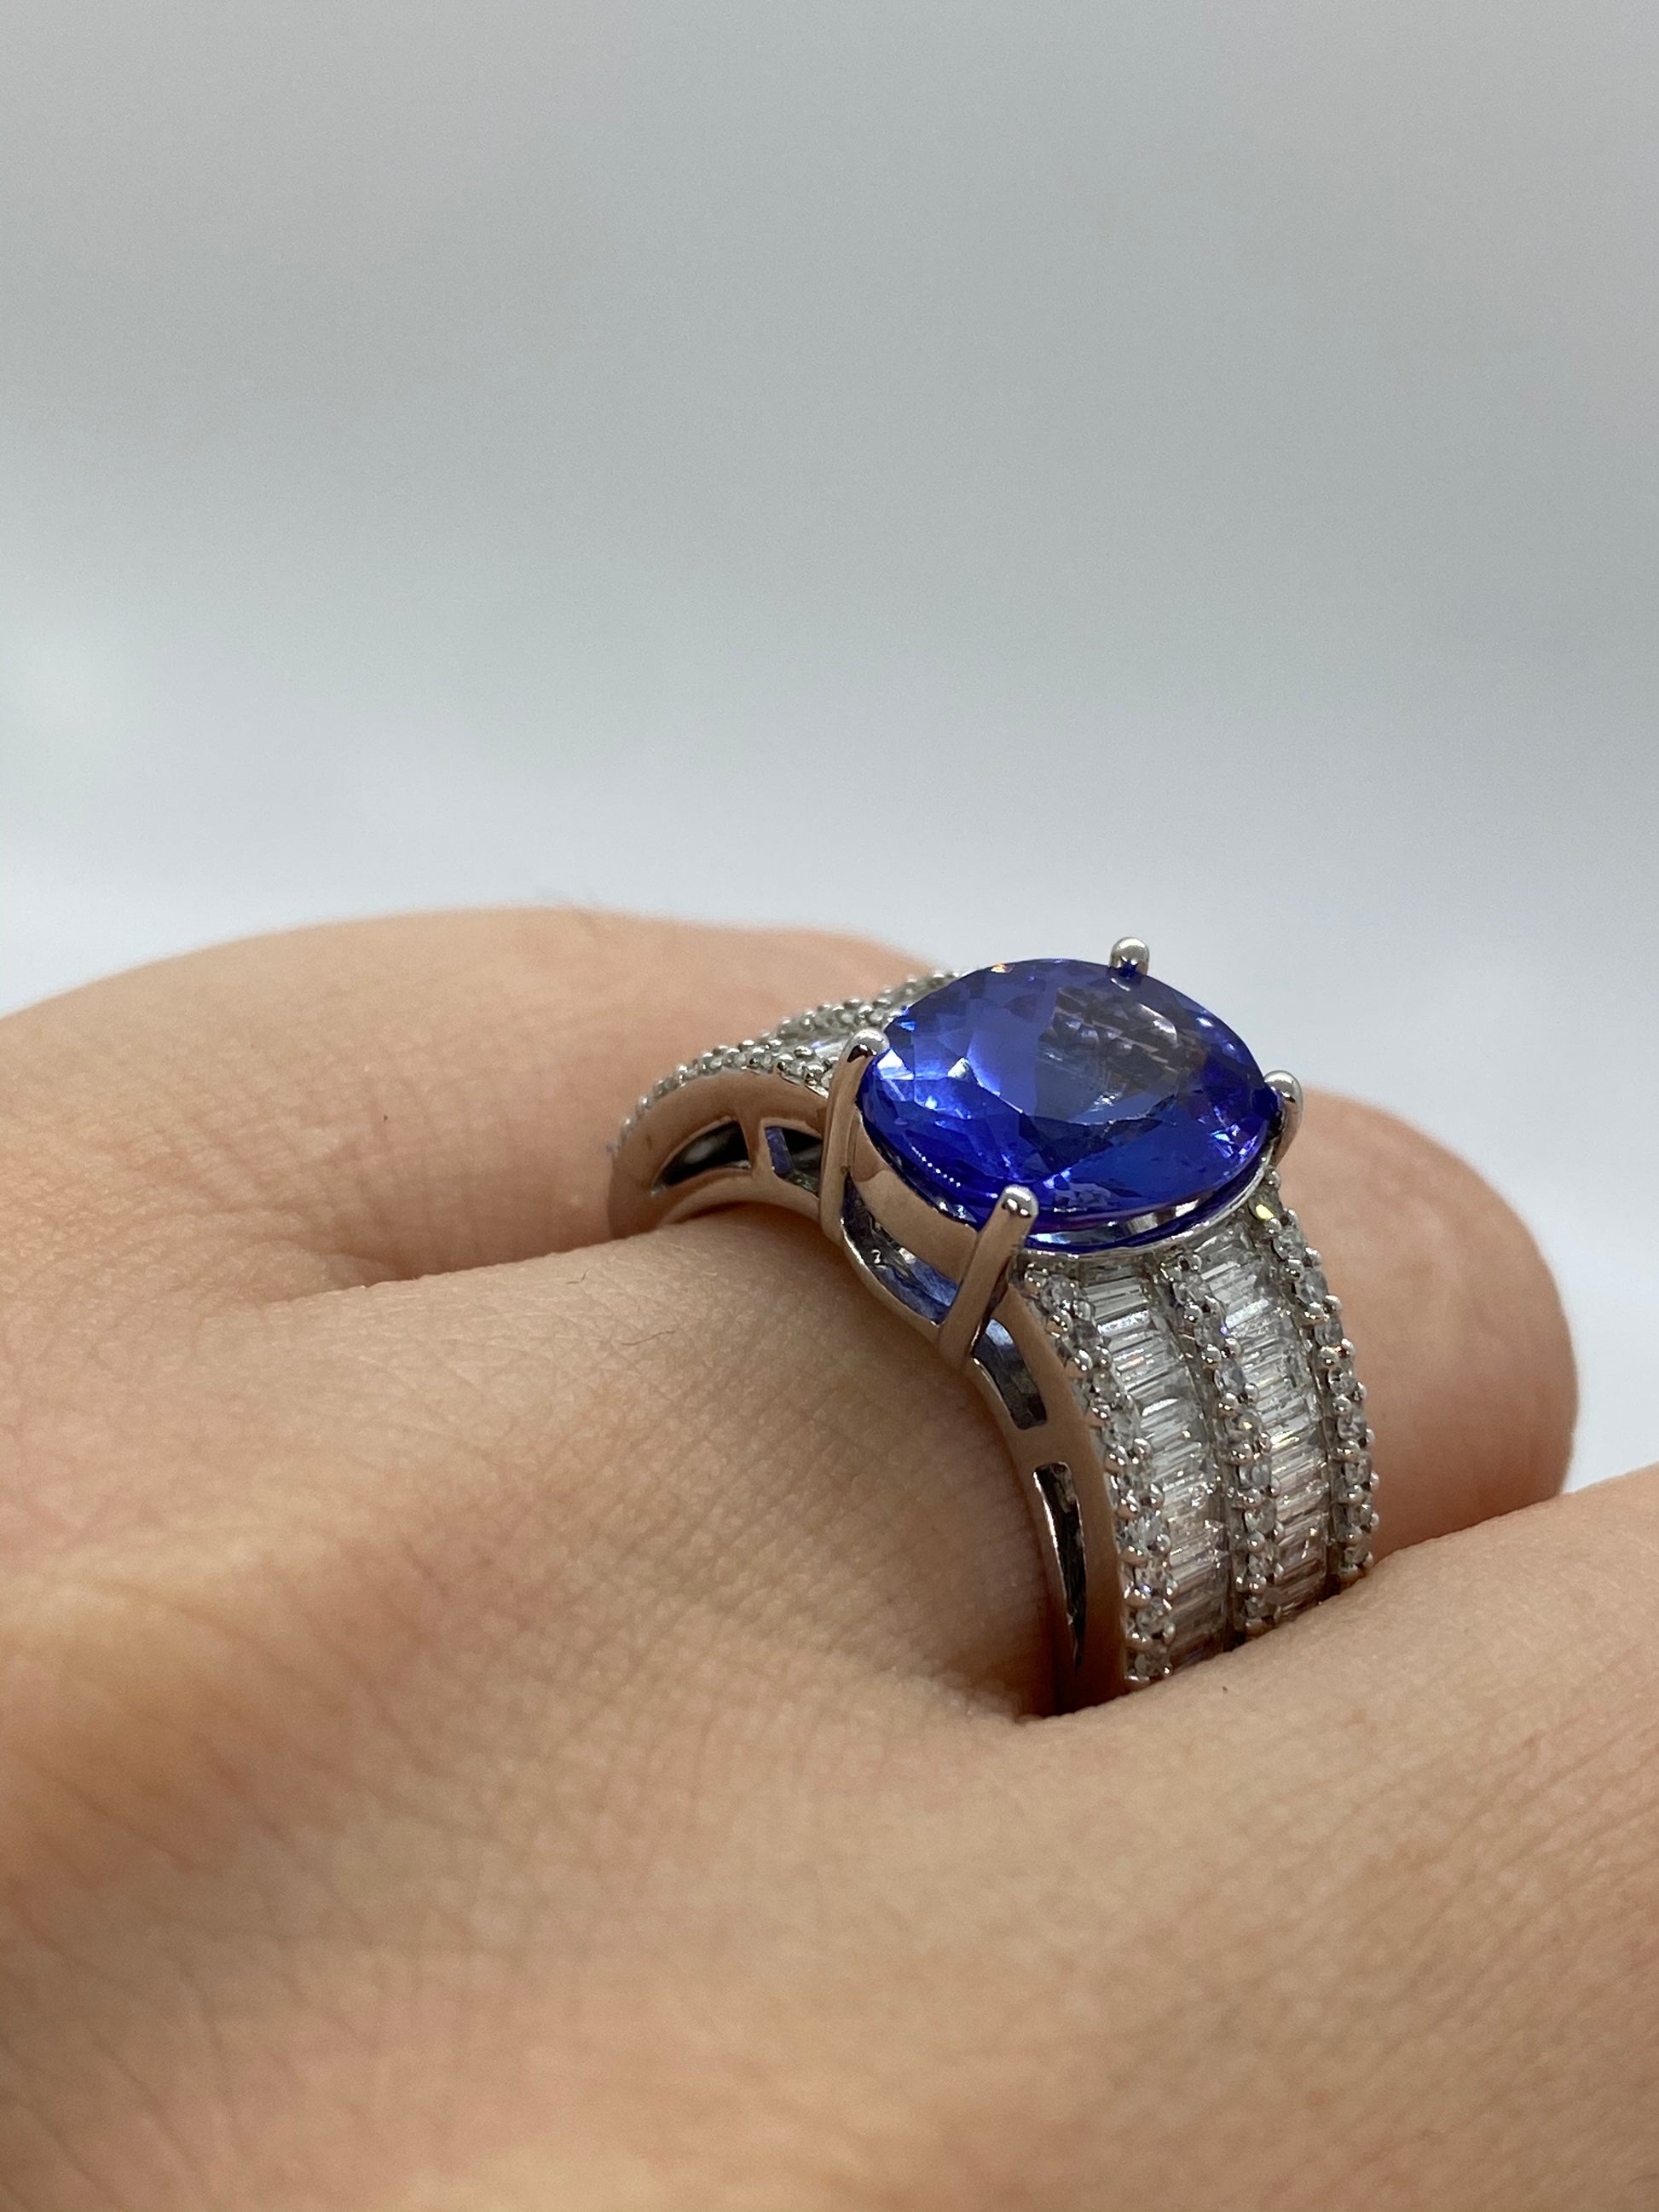 Tanzanite Ring R19144 - Royal Gems and Jewelry